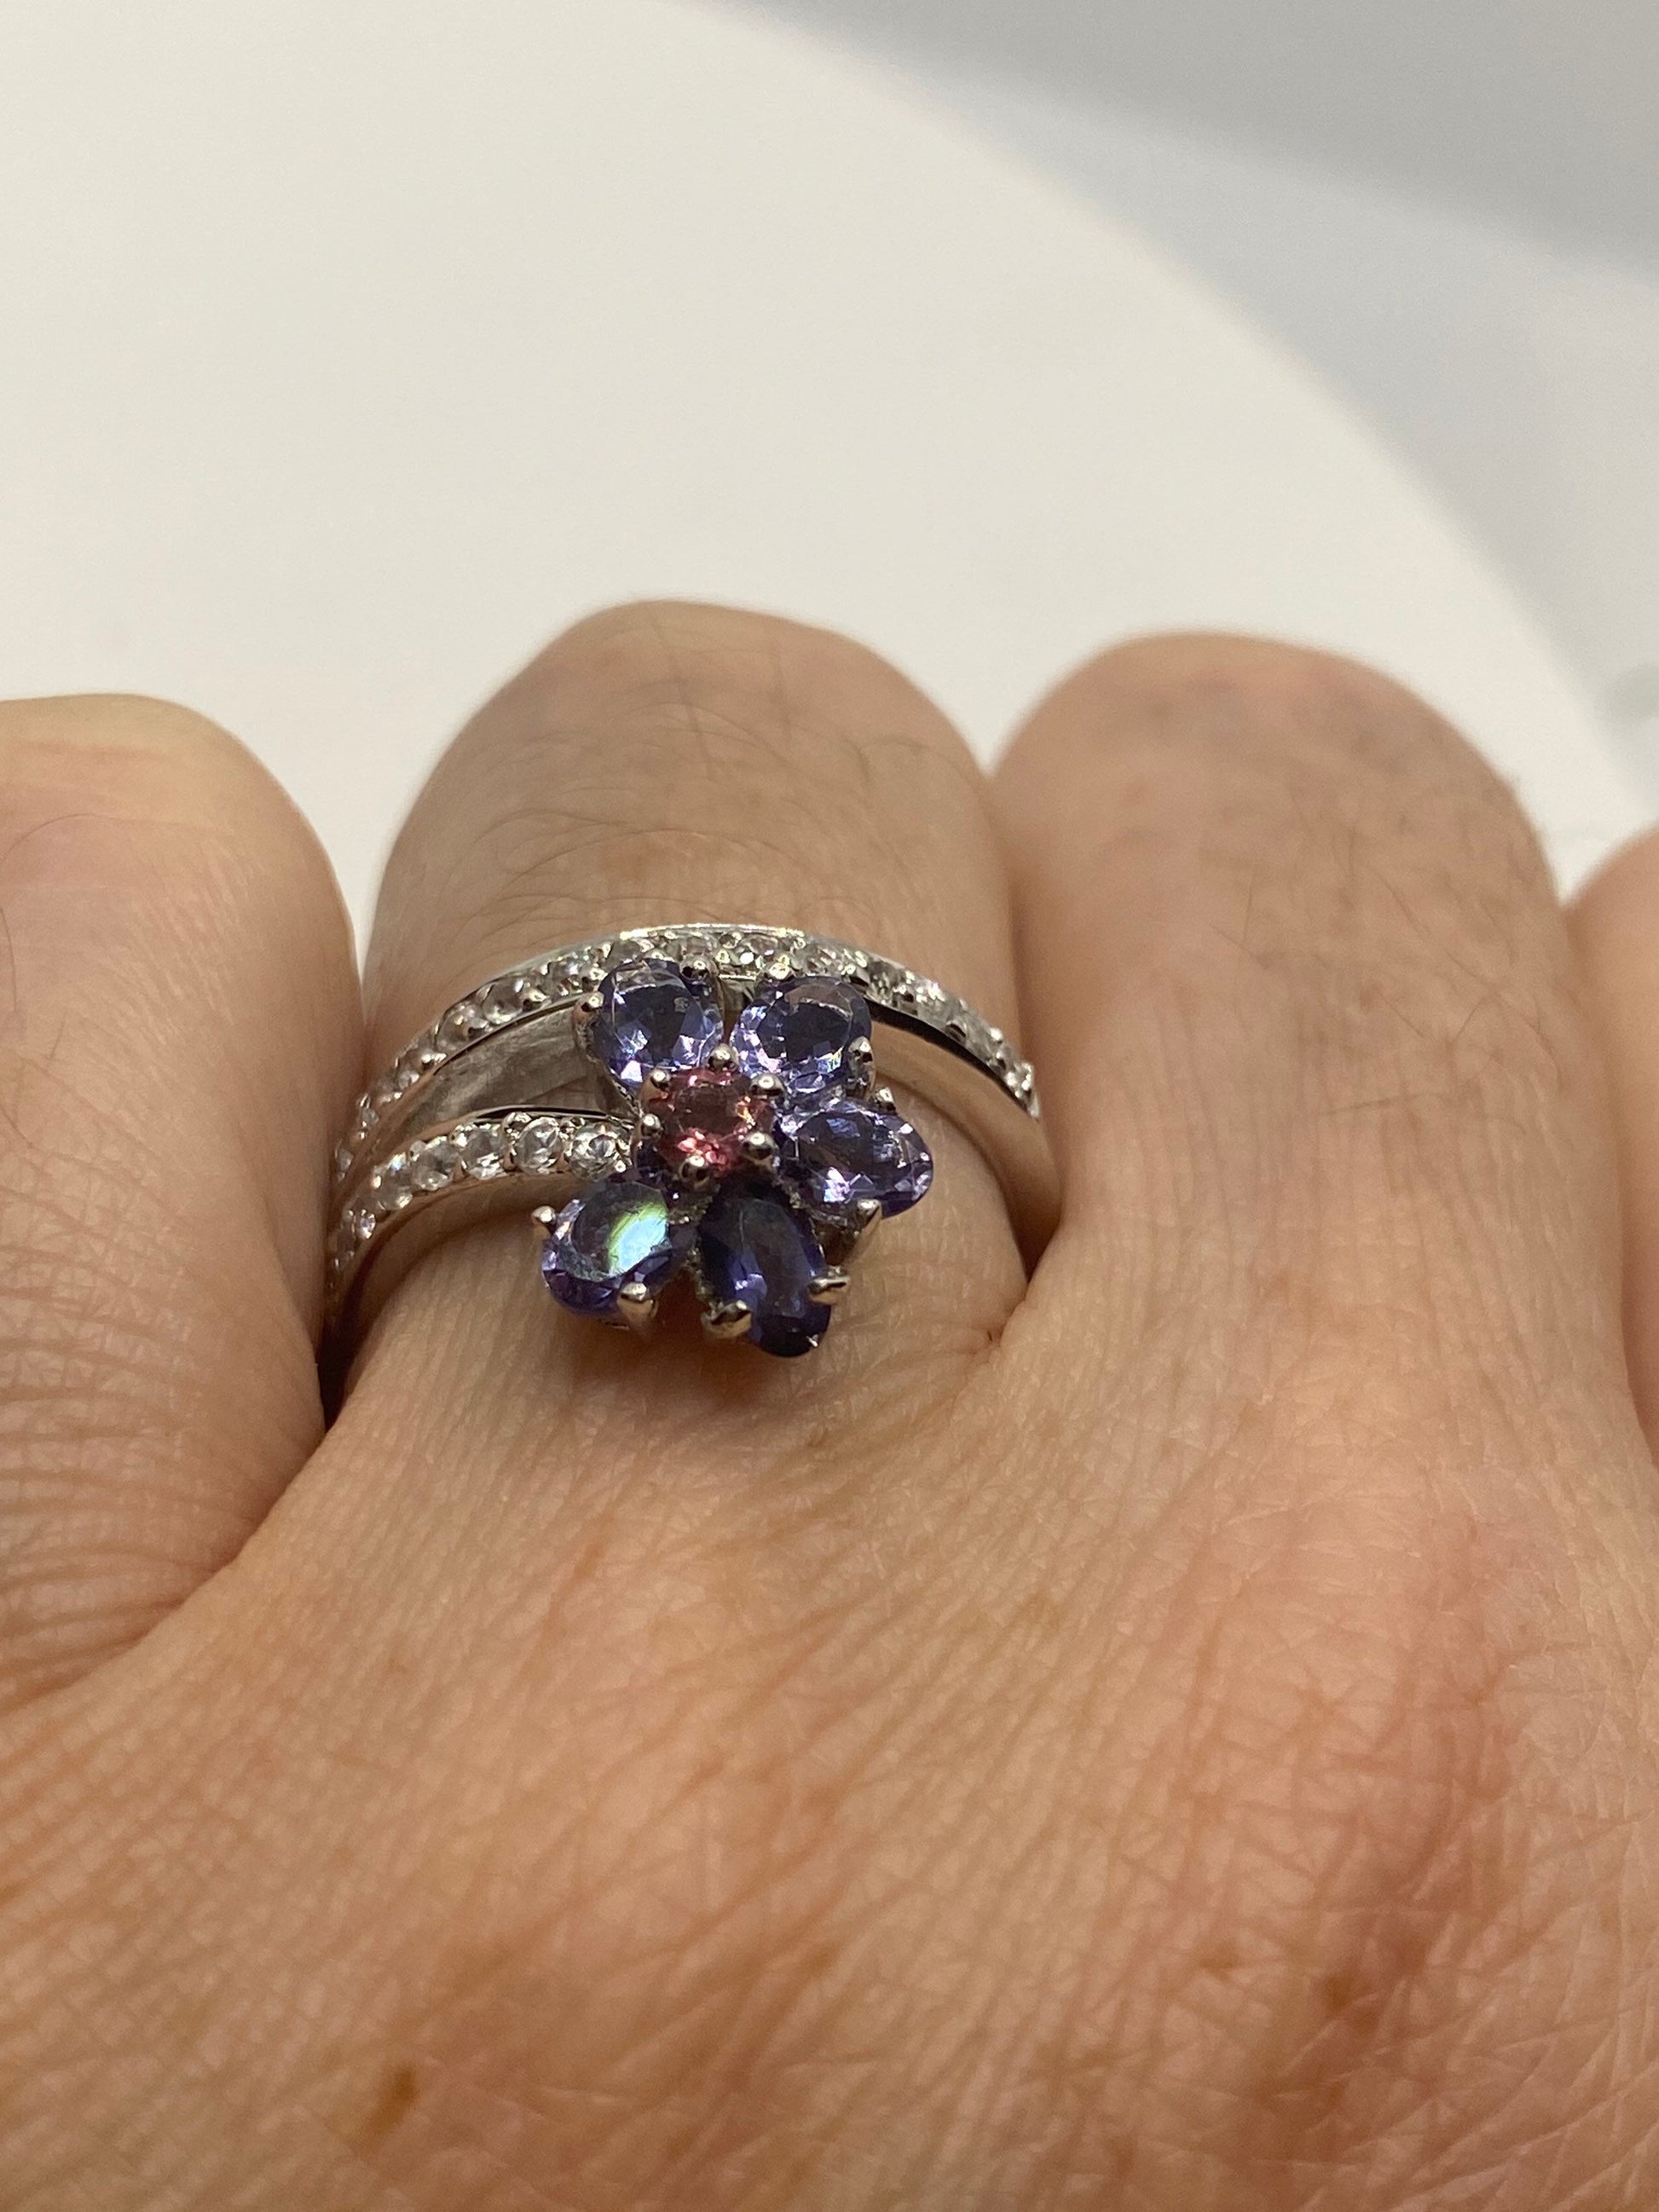 Vintage Blue Tanzanite Setting 925 Sterling Silver Gothic Cocktail Ring Size 7